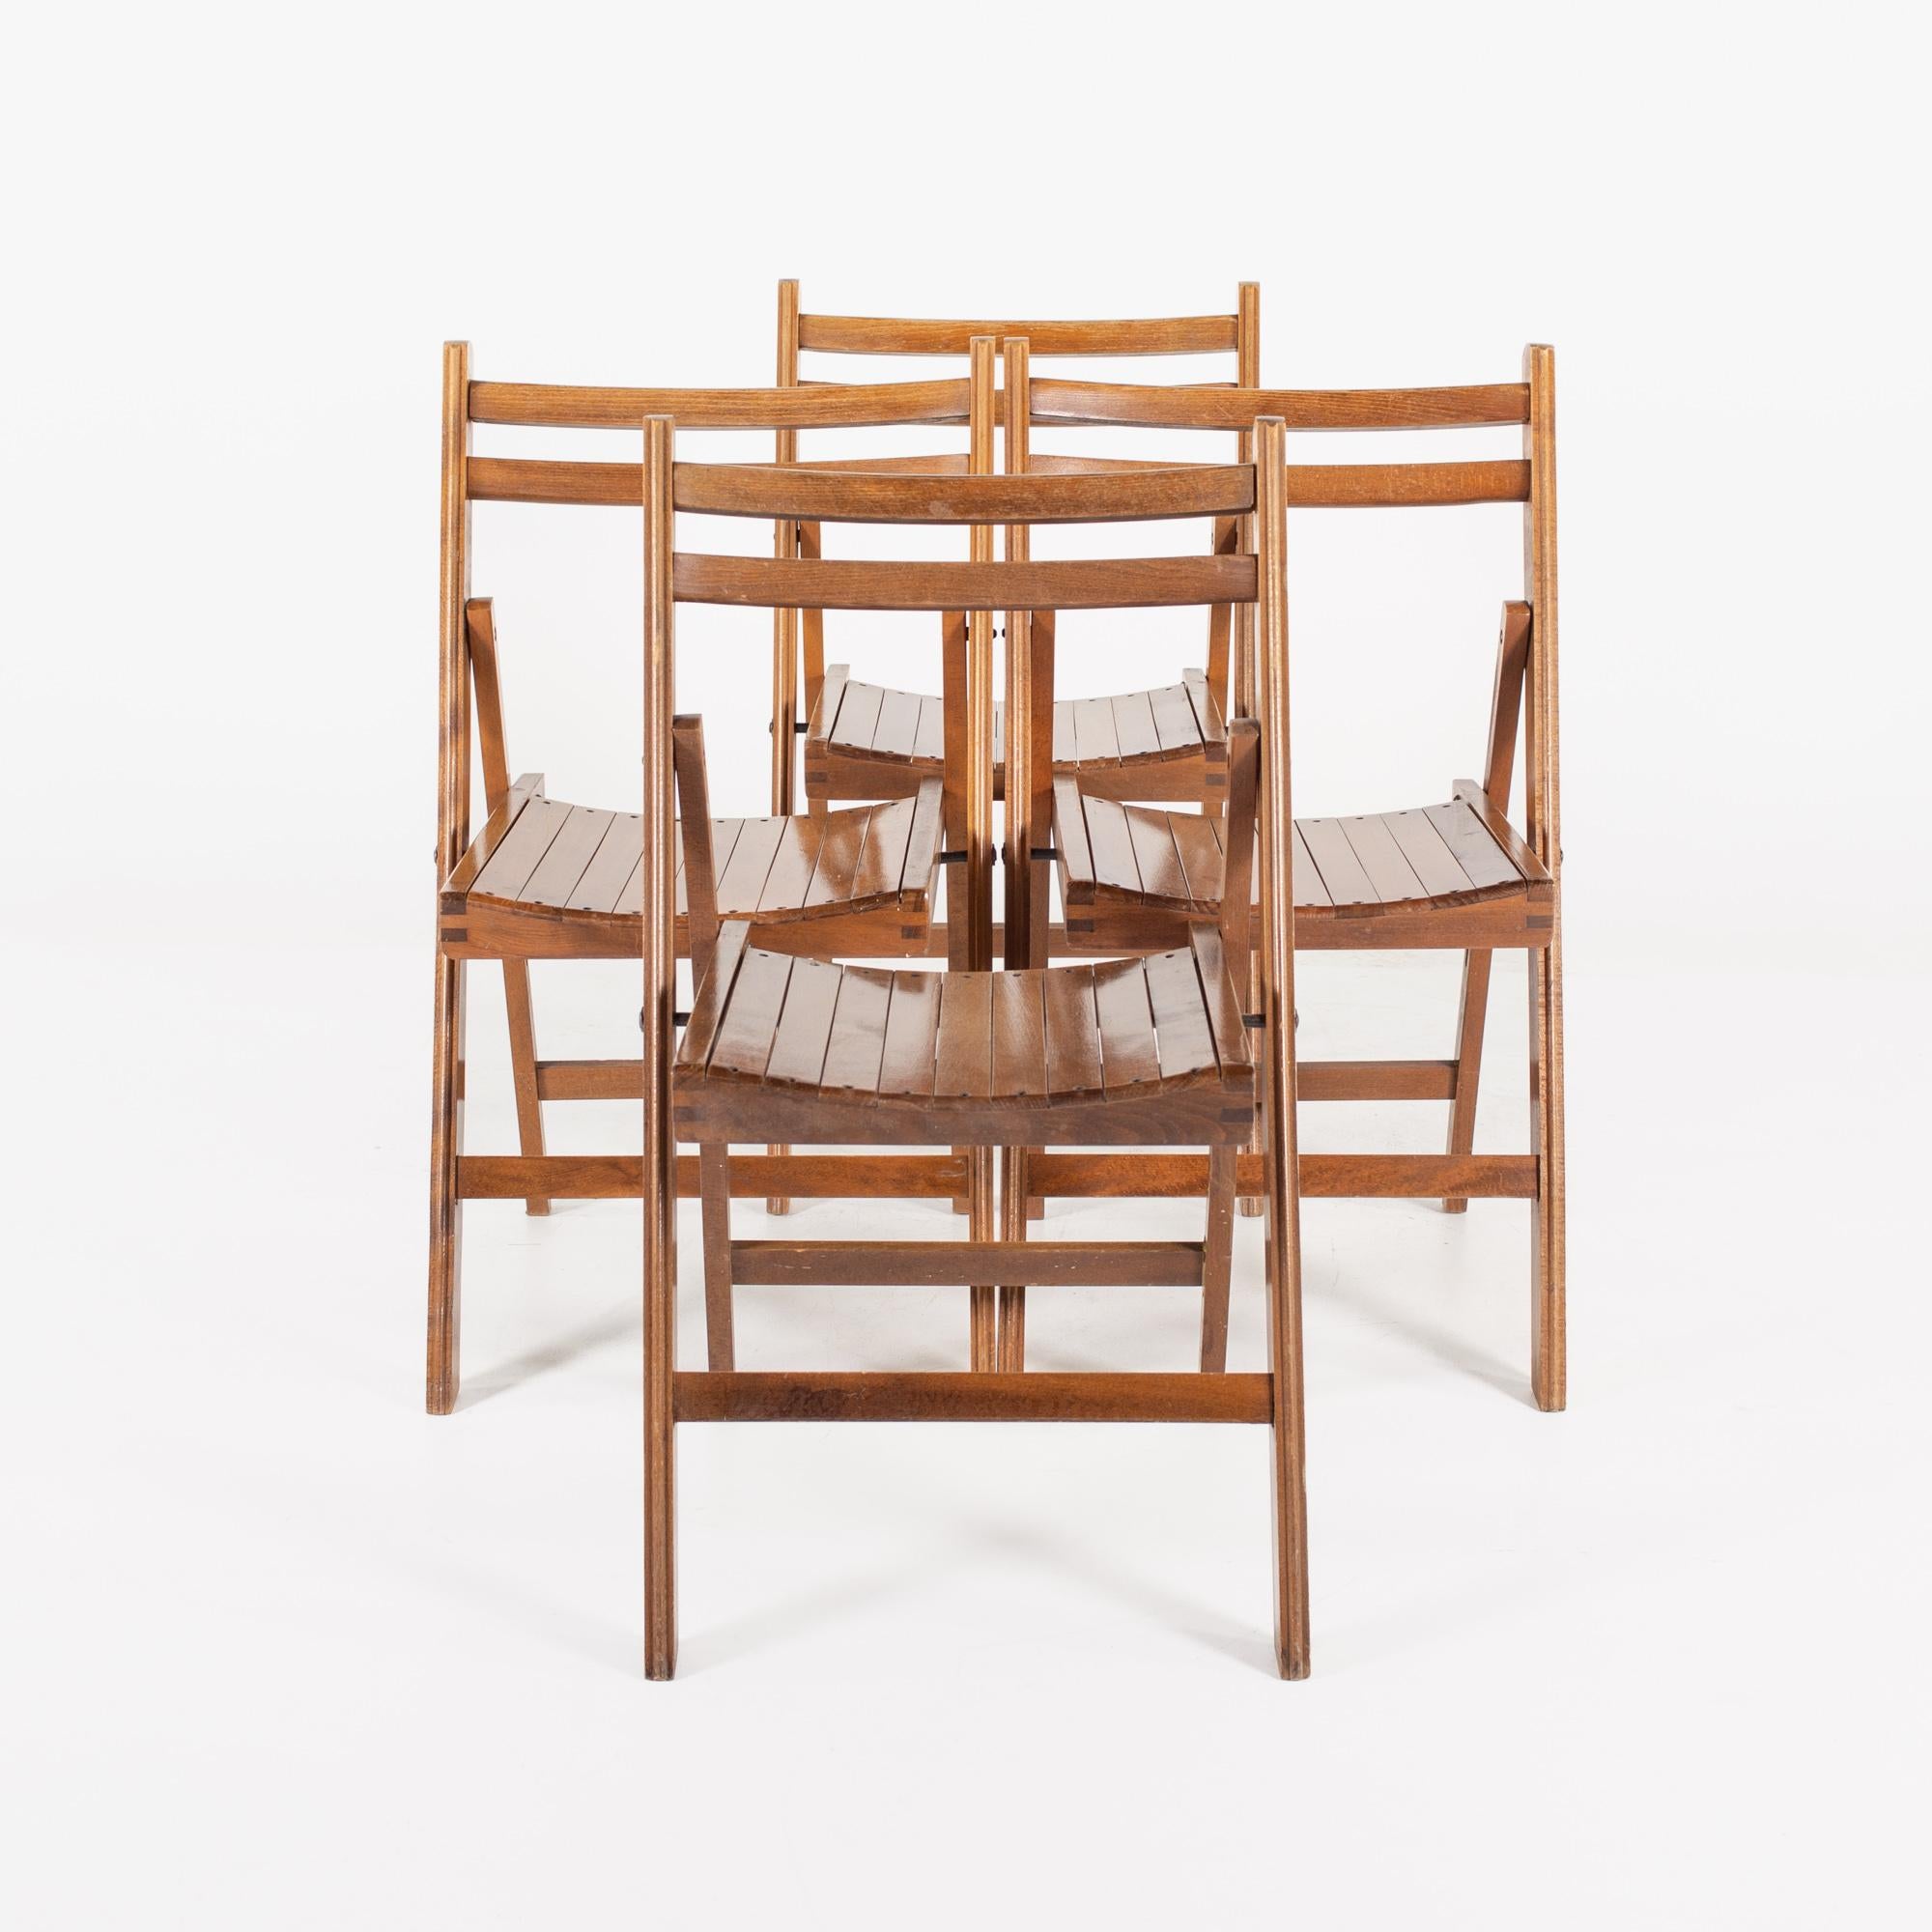 Mid century Slatted folding dining chairs - set of 4

Each chair measures: 18 wide x 21 deep x 31 inches high, with a seat height of 18.5 inches

All pieces of furniture can be had in what we call restored vintage condition. That means the piece